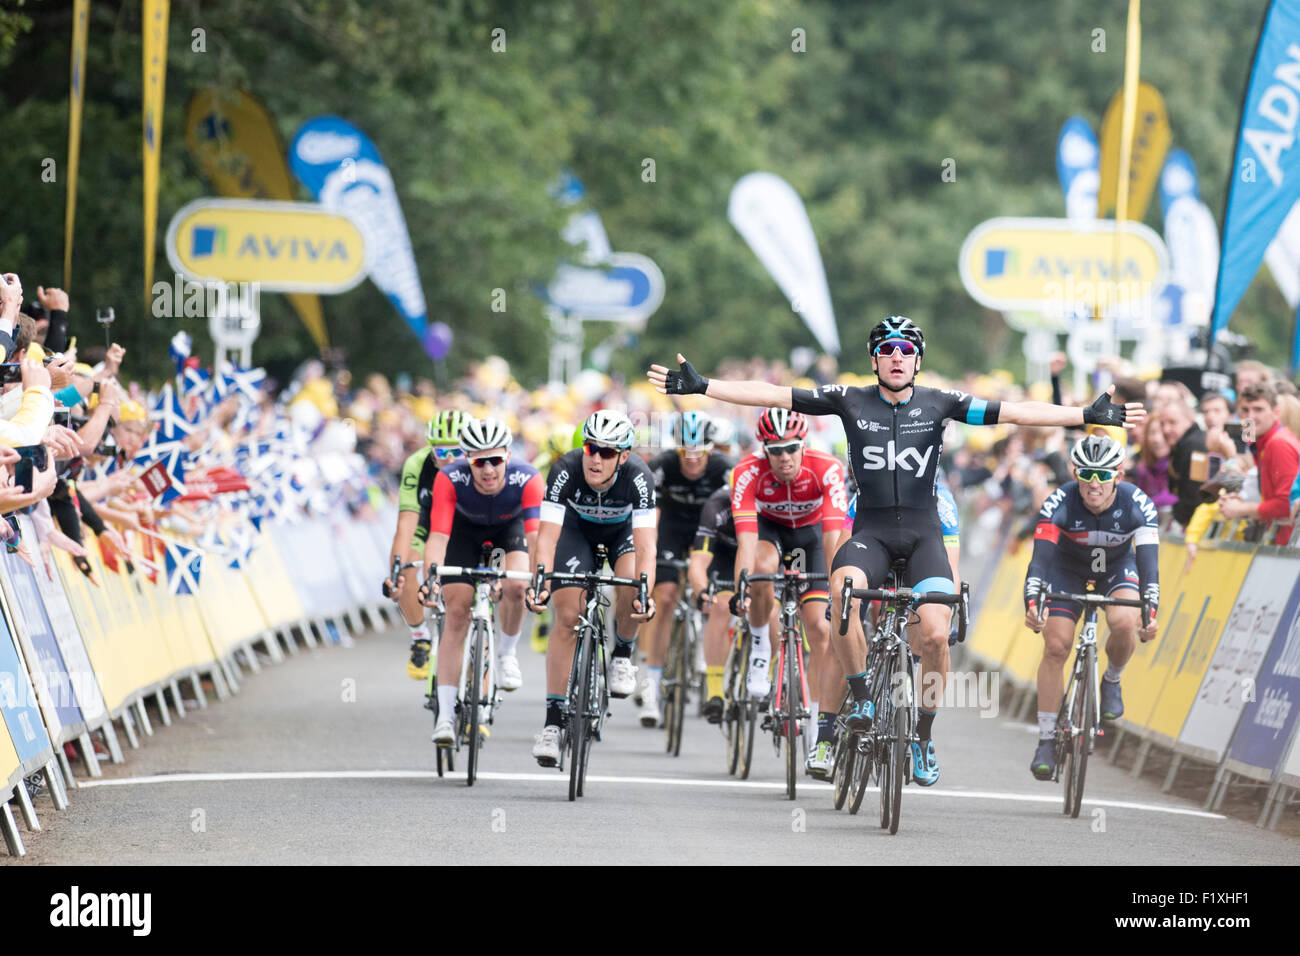 Floors Castle, Kelso, UK. 08th Sep, 2015. Elia Viviani (Team Sky) wins stage three of the Aviva Tour of Britain between Cockermouth and Kelso, United Kingdom on 8 September 2015. The race, which covers 7 stages, started on 6 September in Beaumaris, Anglesey, and ends on 13 August in London, United Kingdom. Viviani also won stage one of the race on Sunday into Wrexham. Credit:  Andrew Peat/Alamy Live News Stock Photo